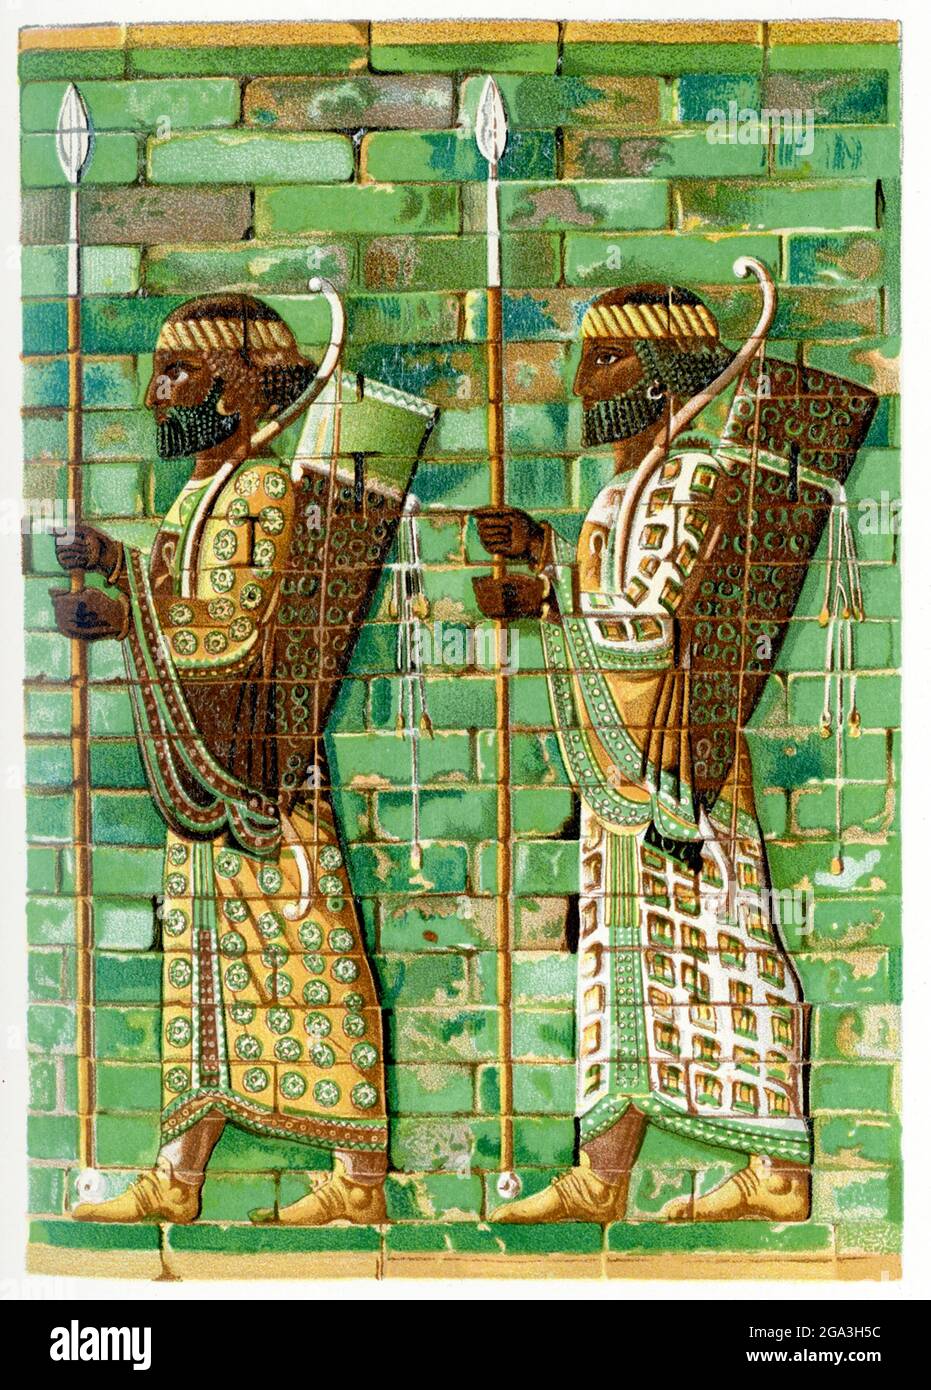 This 1903 illustration shows a frieze of archers at Susa. Shown here is part of the relief frieze in colored glazed tile from the Audience Hall (known as the apadana) of the royal palace at Susa (in present-day Iran). The figures represent members of the powerful royal bodyguard of a Persian king around 400 B.C. , the time of Darius I, who invaded Greece and started what is known today as the Persian Wars (the Greeks being the victors). Darius I built the palace. This relief is now housed in the Louvre in Paris, France. Stock Photo